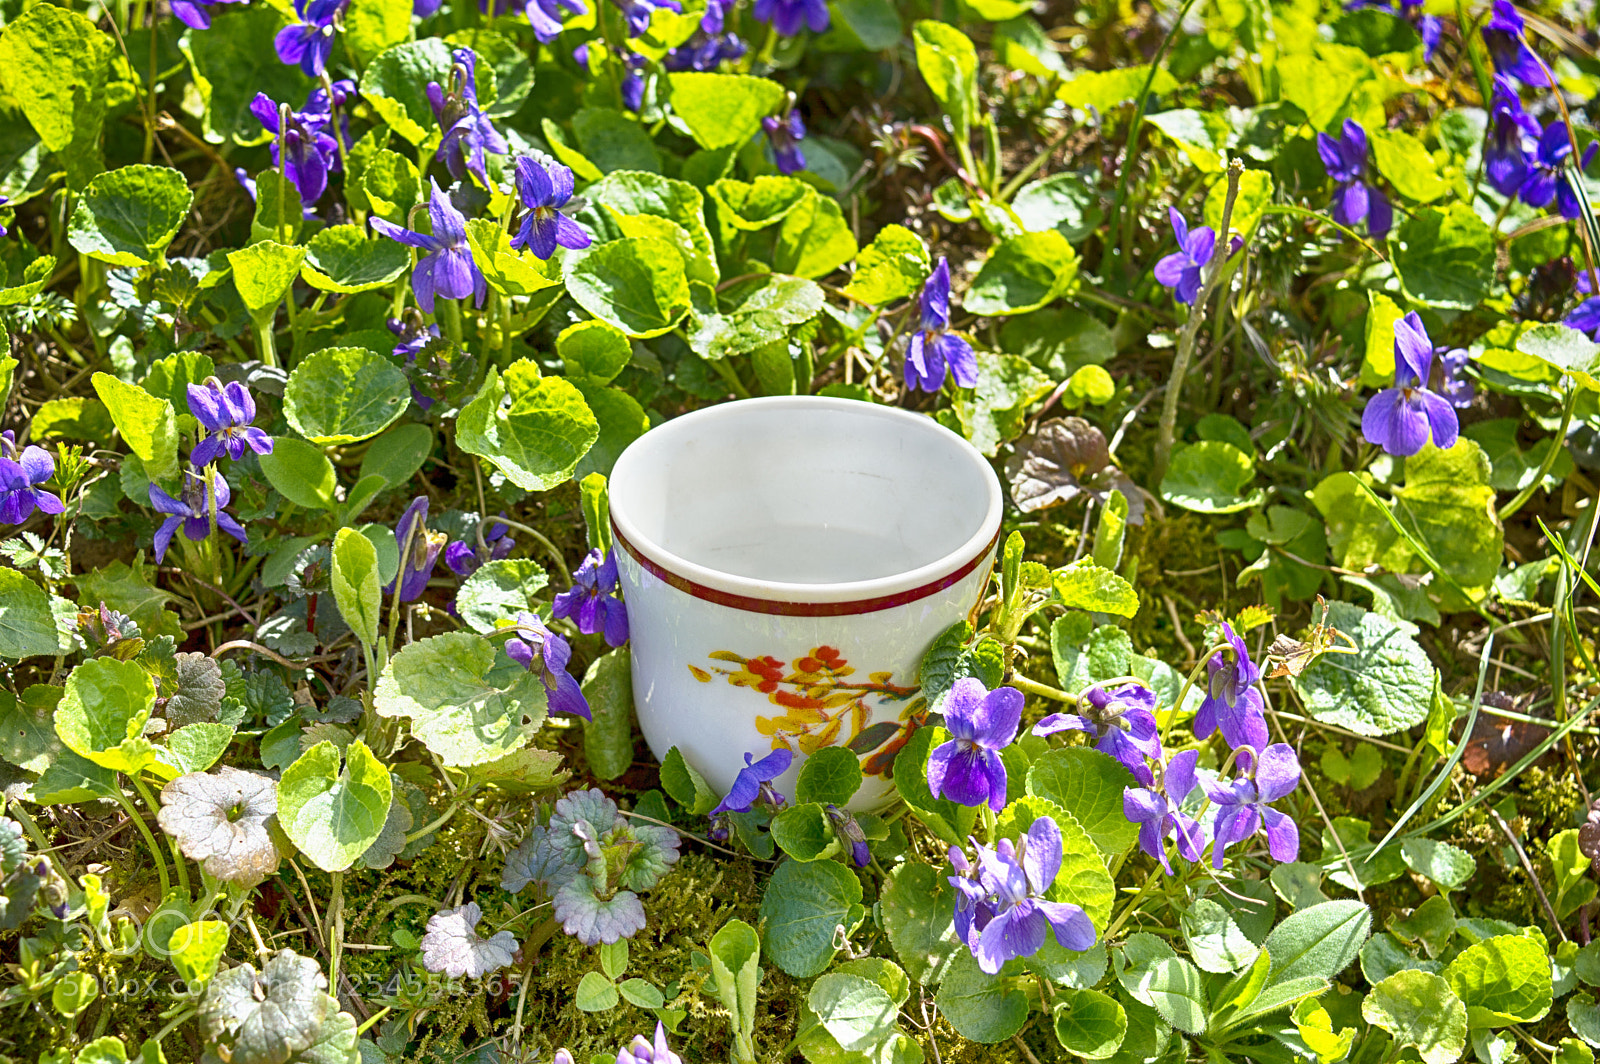 Nikon D3200 sample photo. A cup of violet photography